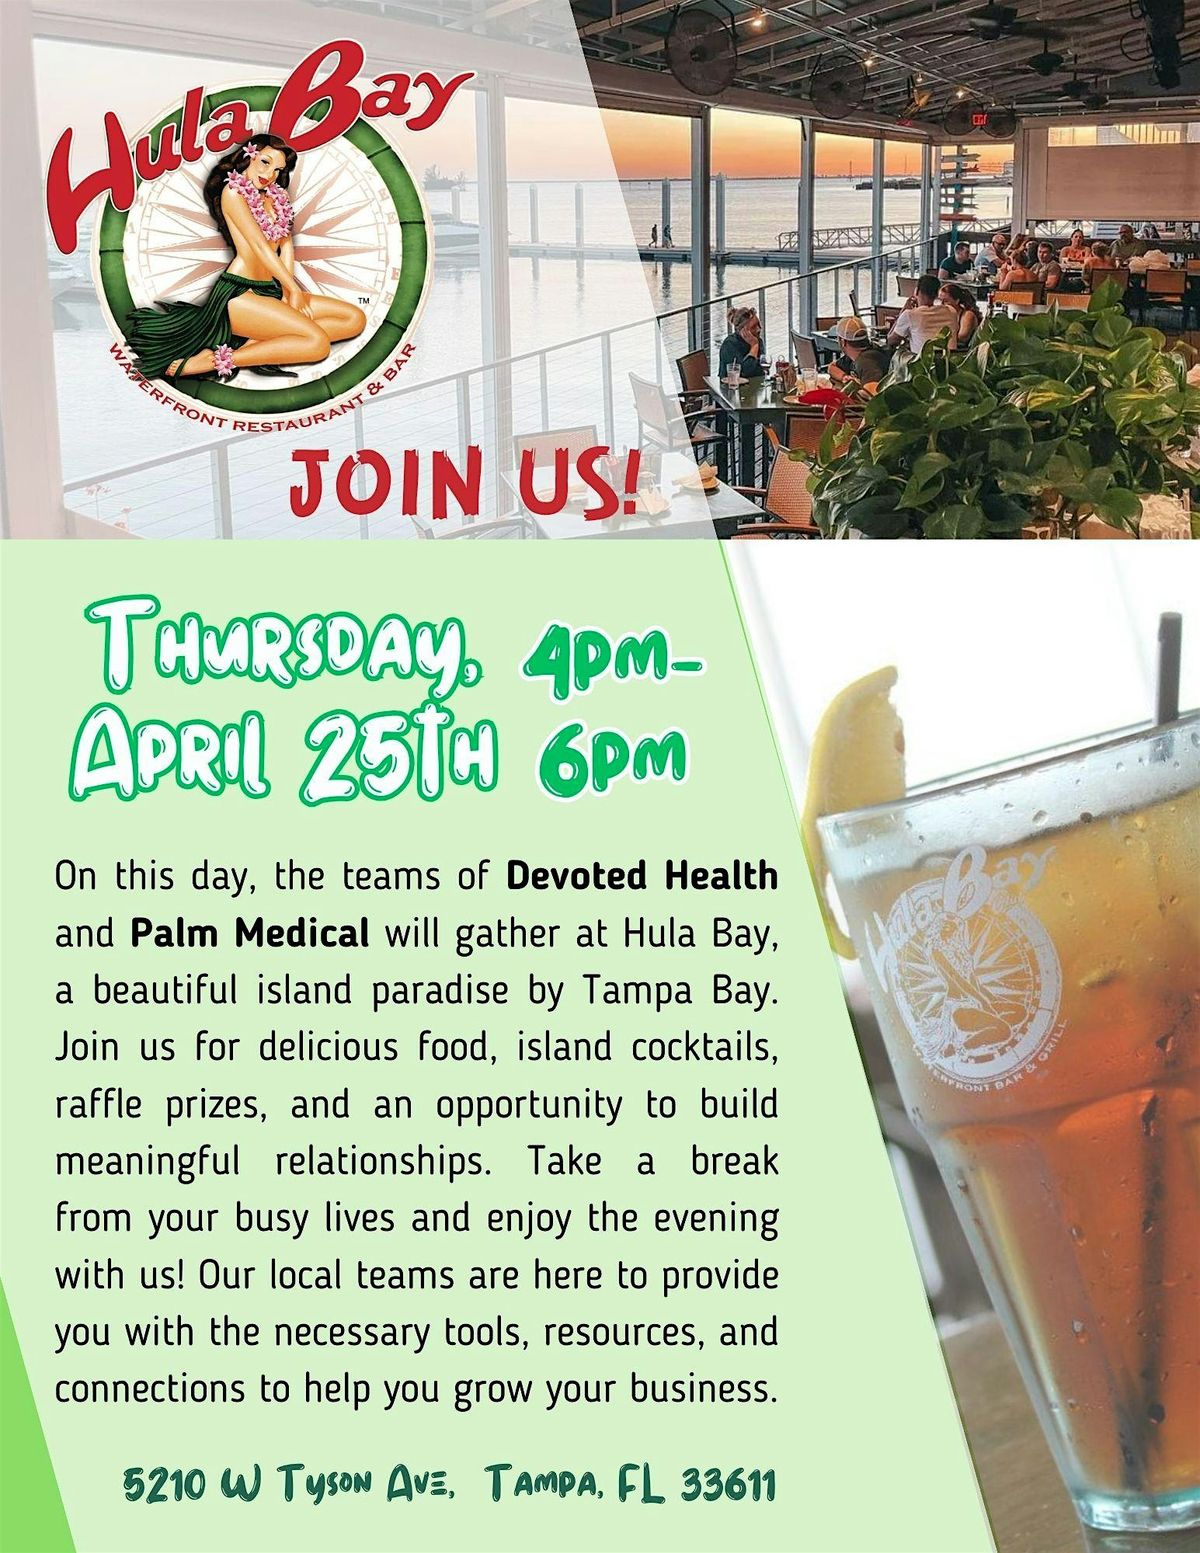 Broker mixer the HULA BAY way with Devoted & Palm Medical